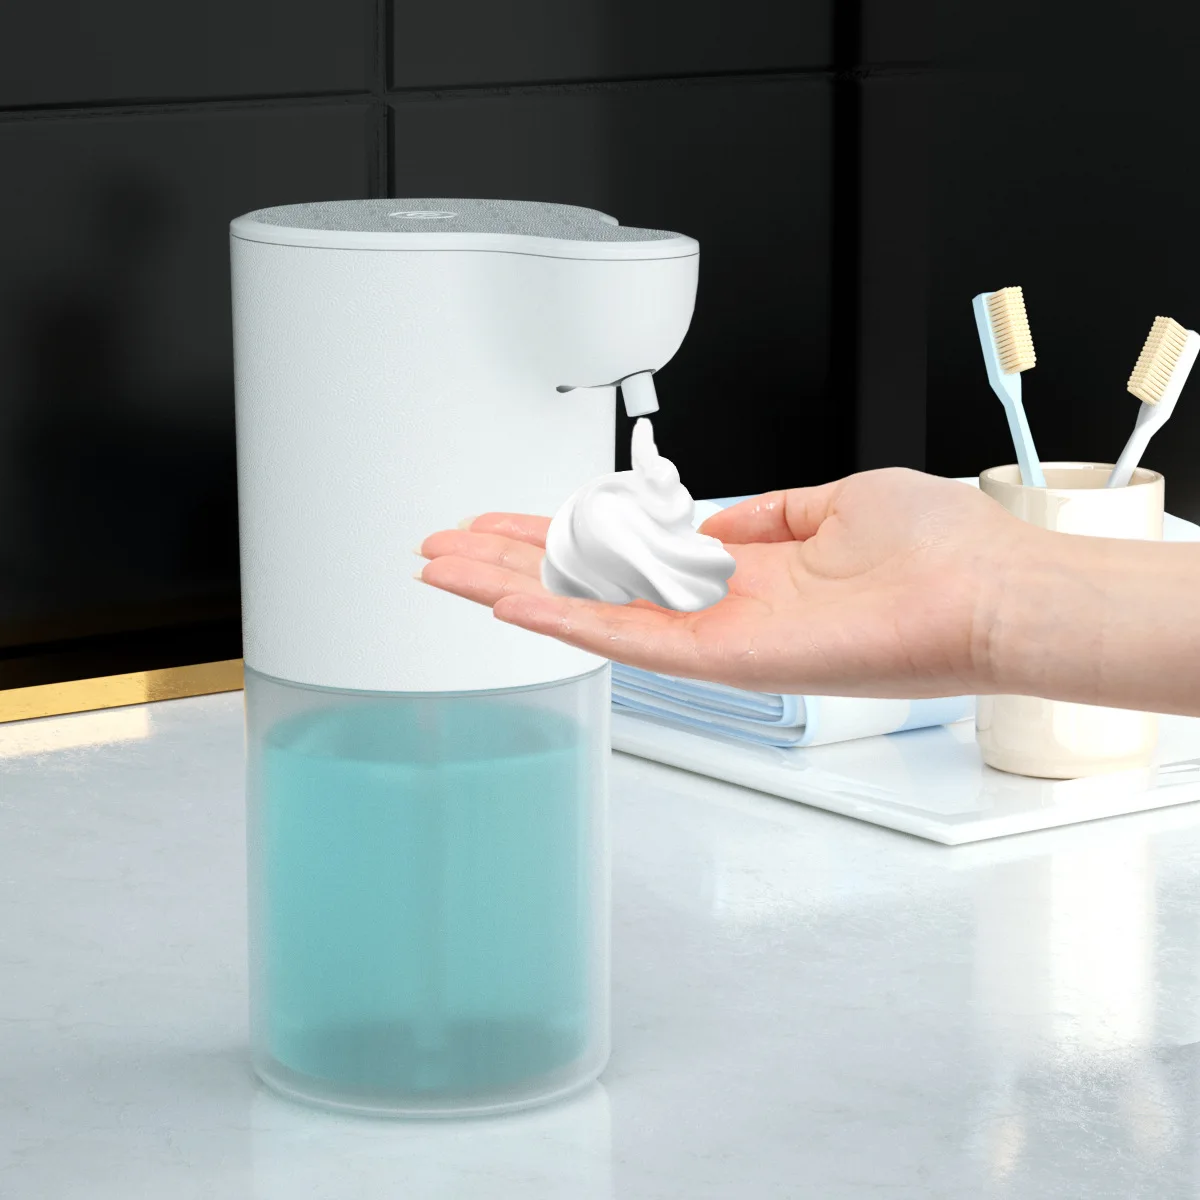 

Household Electric Foam Hand Washing Machine Automatic Induction Hand Sanitizer Antibacterial Alcohol Detergent Soap Dispenser